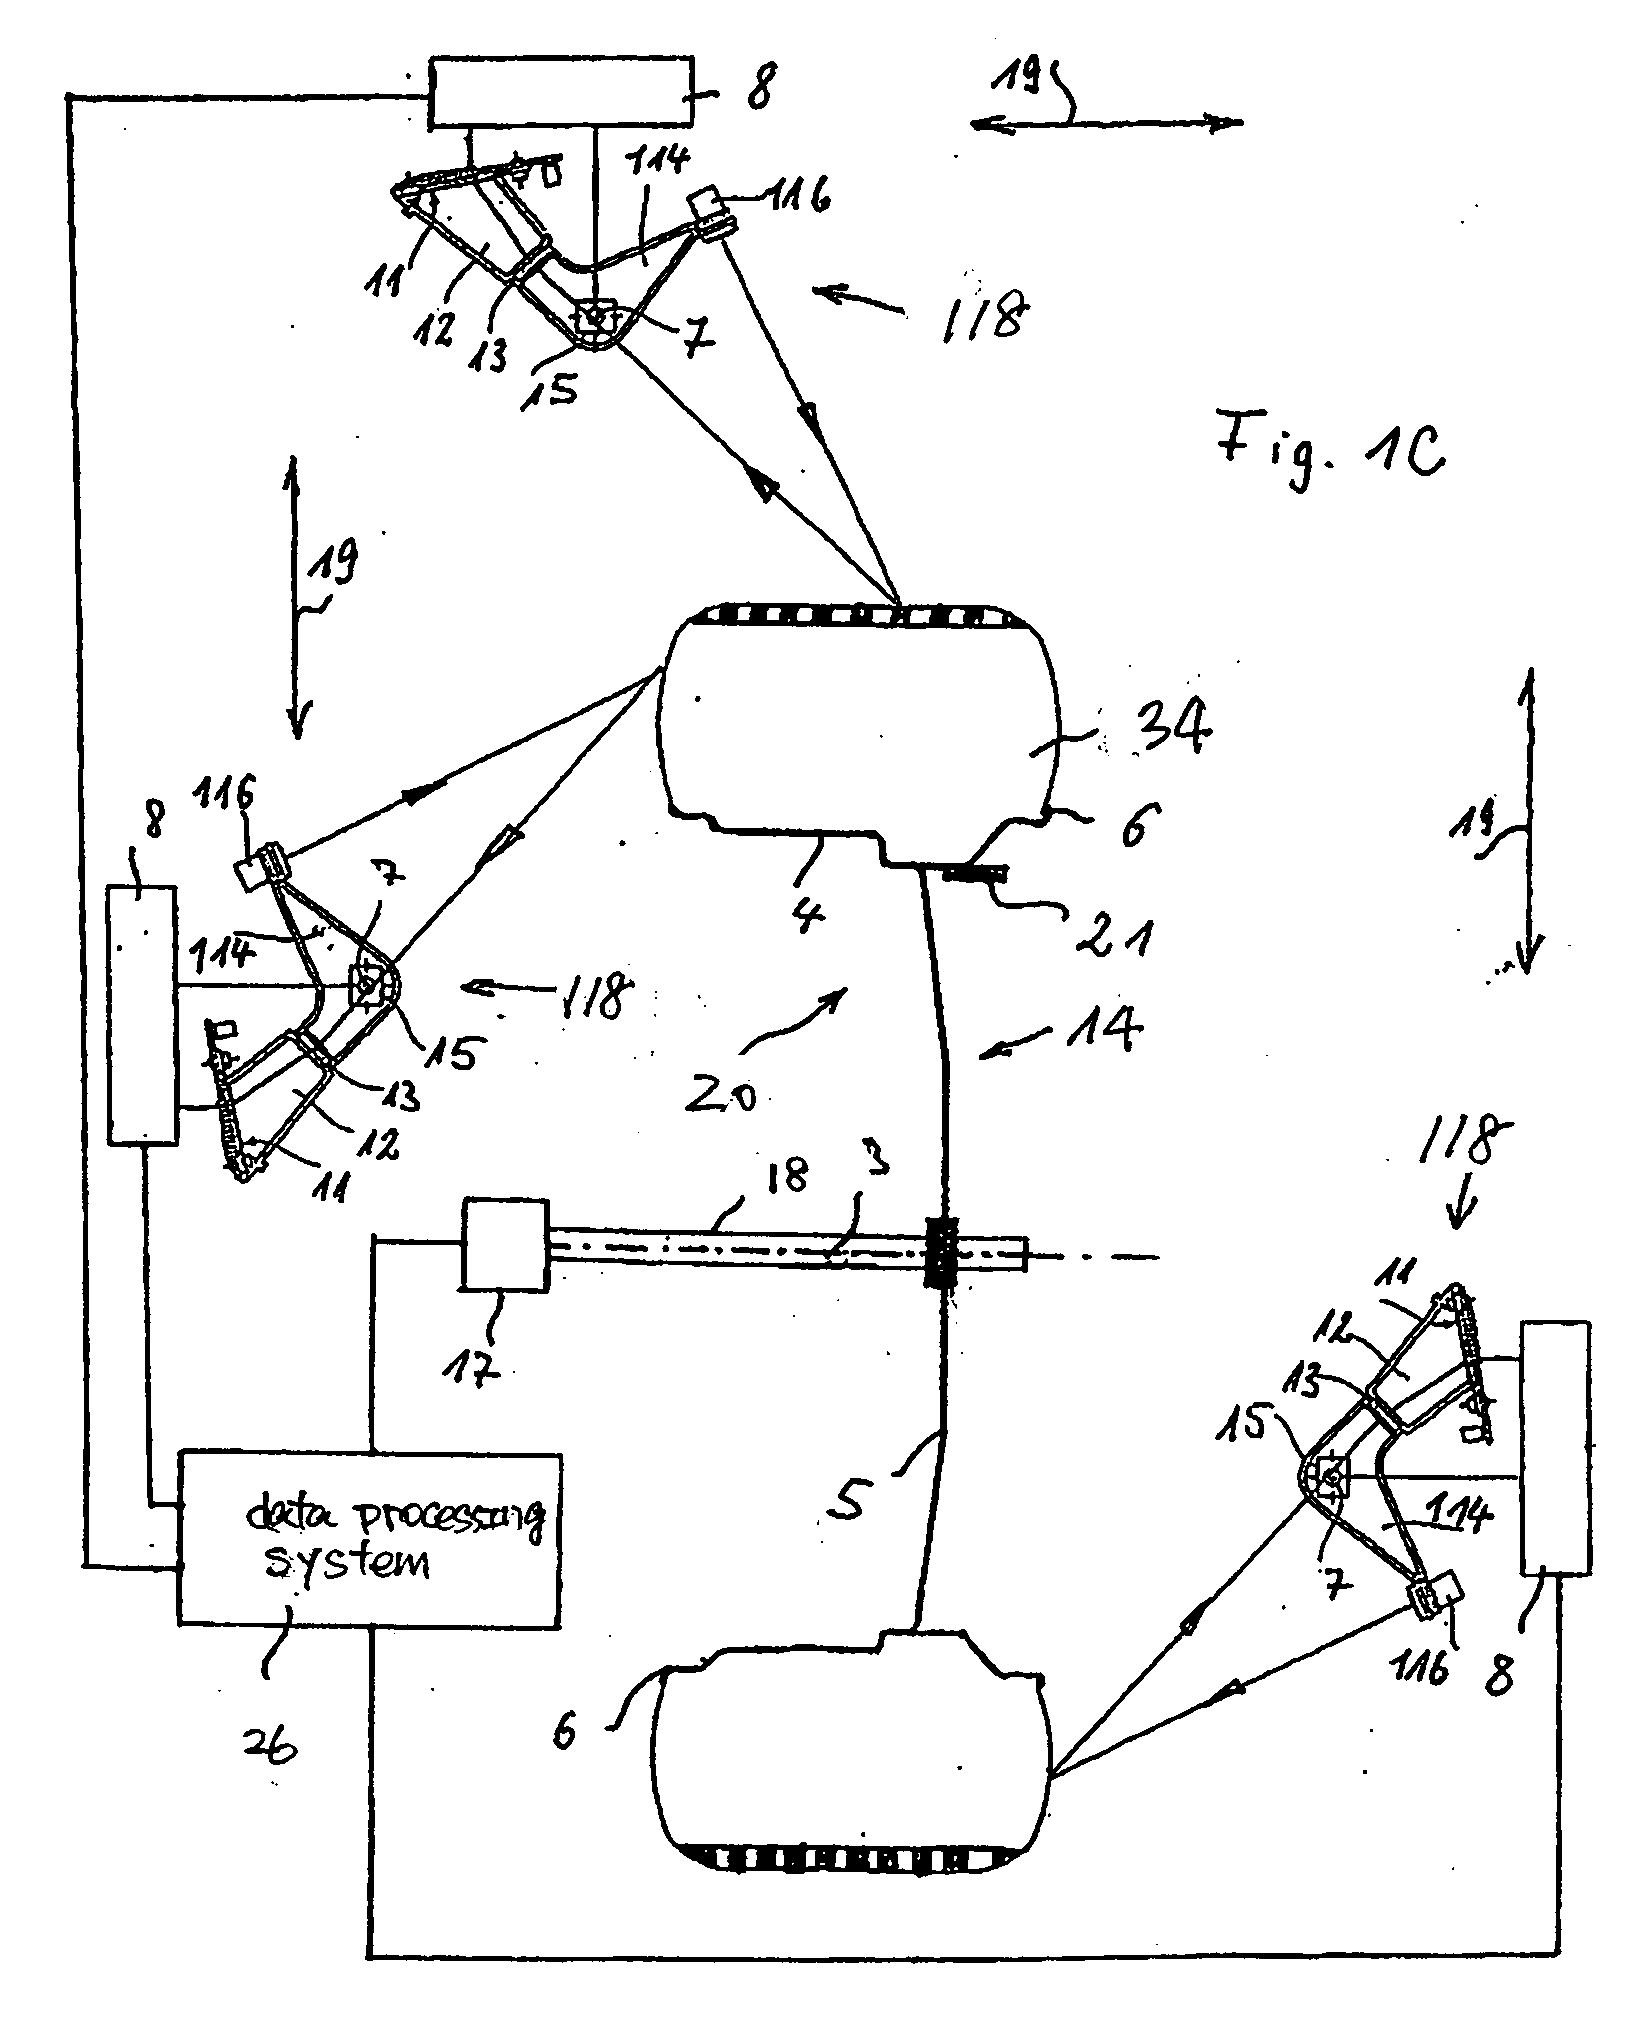 Non-contact method and system for tire analysis